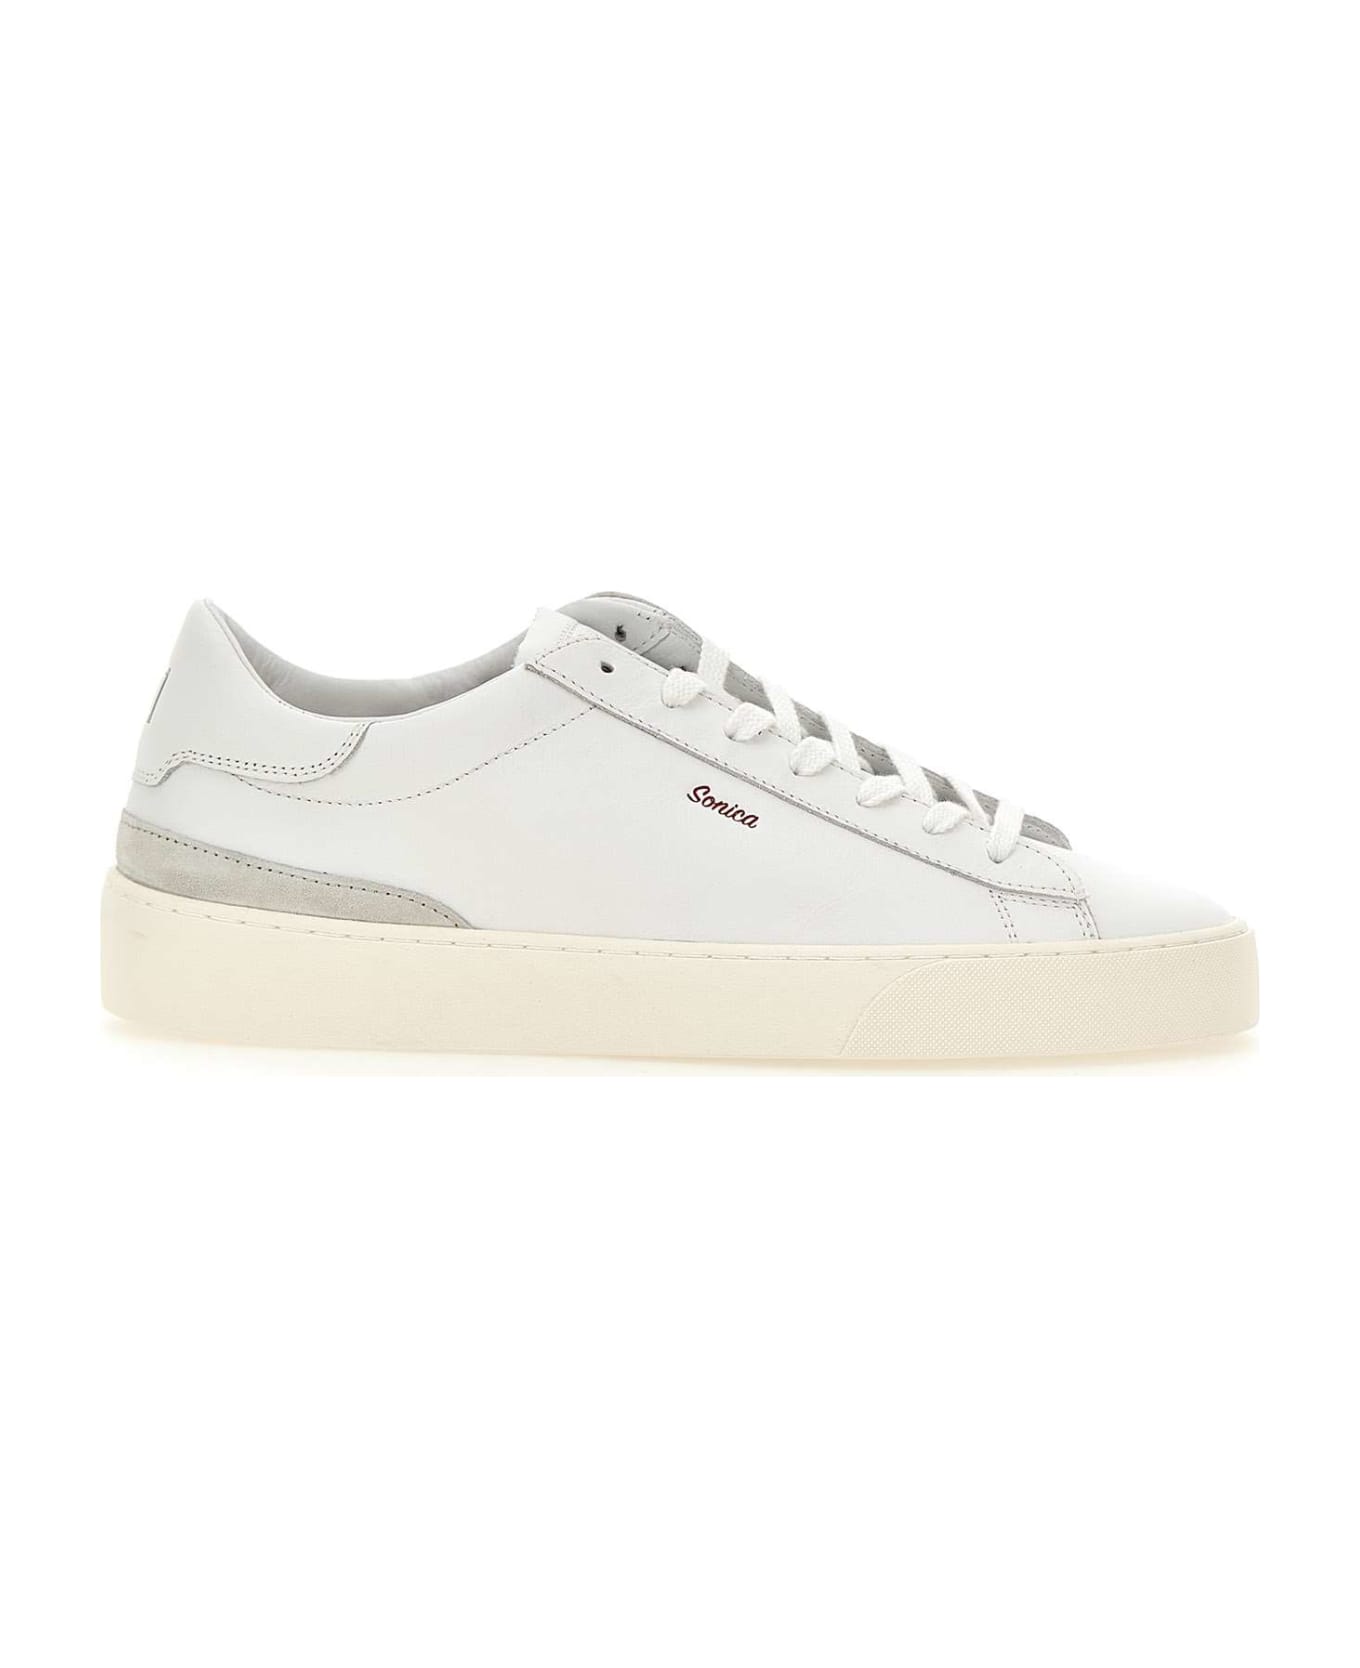 D.A.T.E. "sonica Calf" Leather Sneakers - WHITE スニーカー